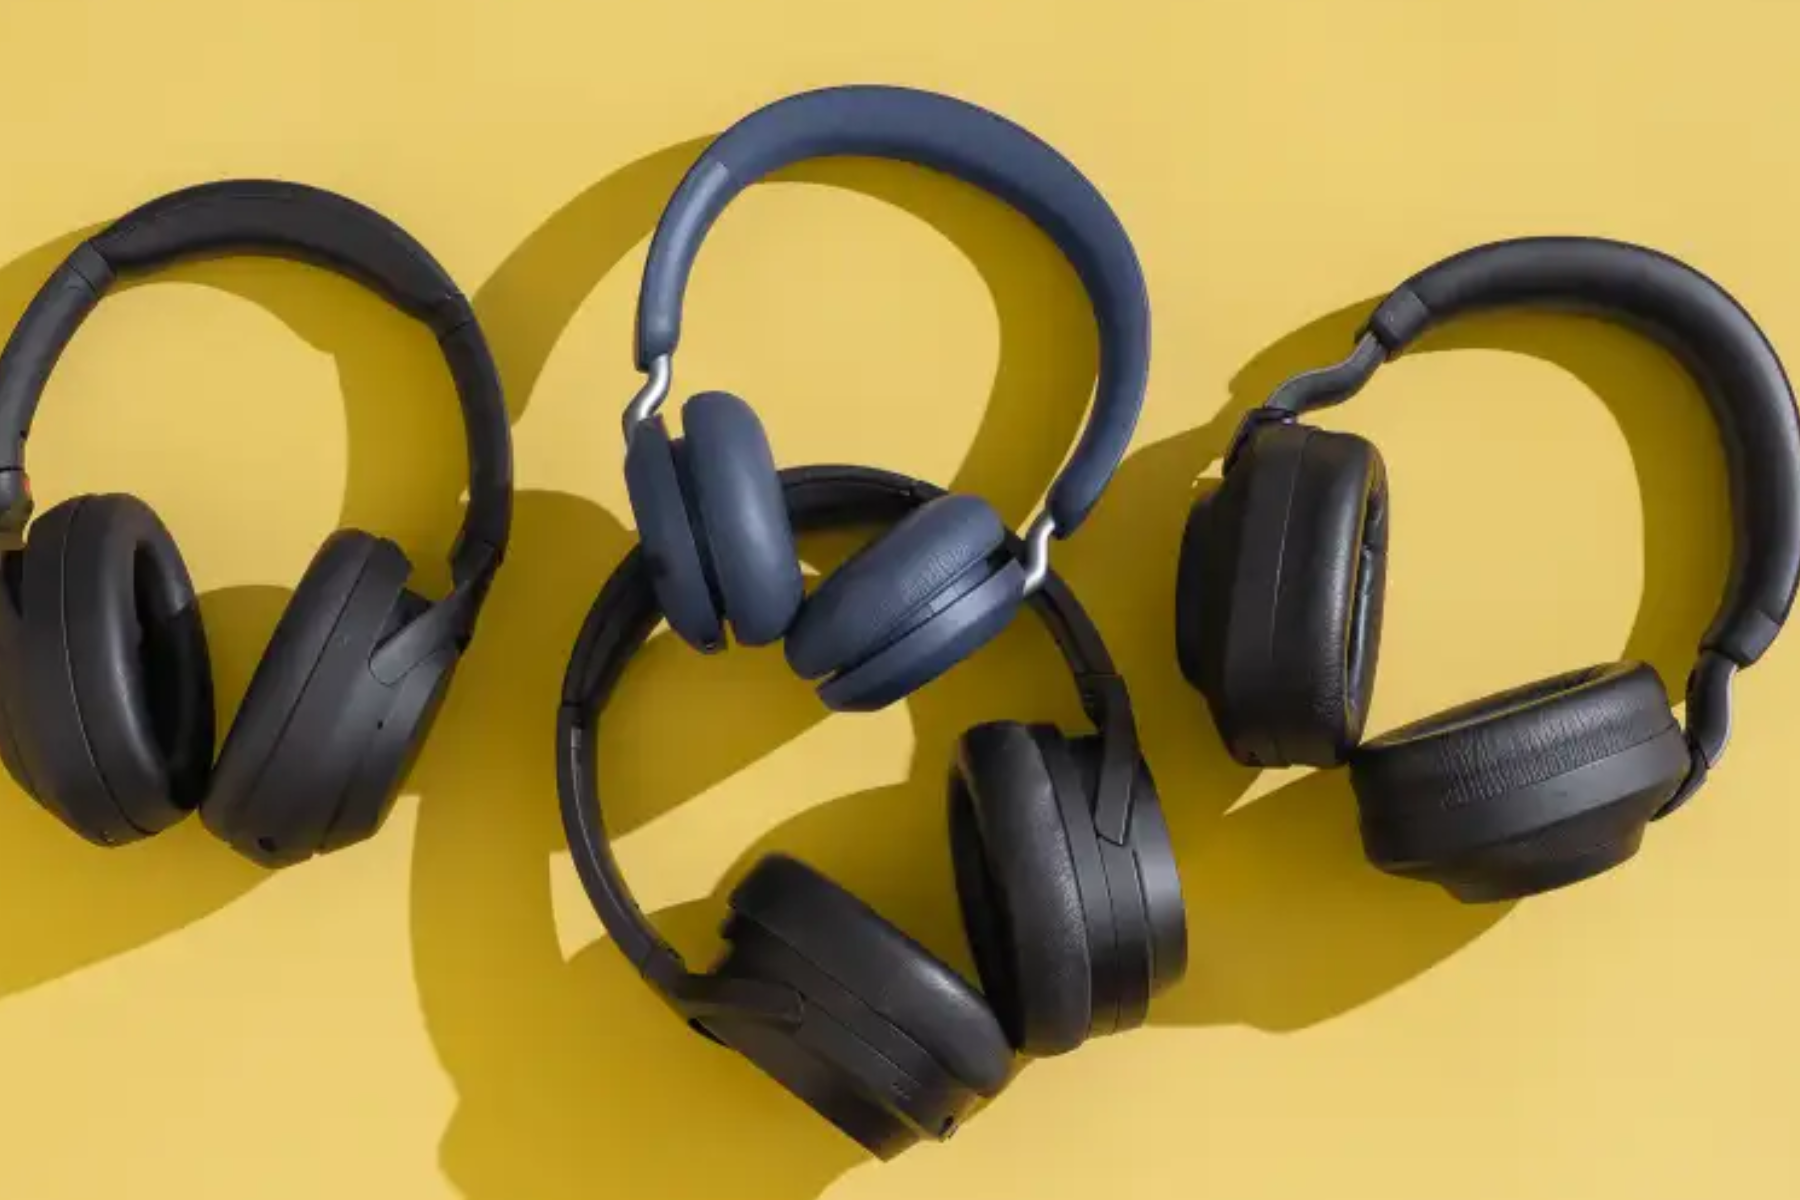 Four different Bluetooth headphones on a yellow background